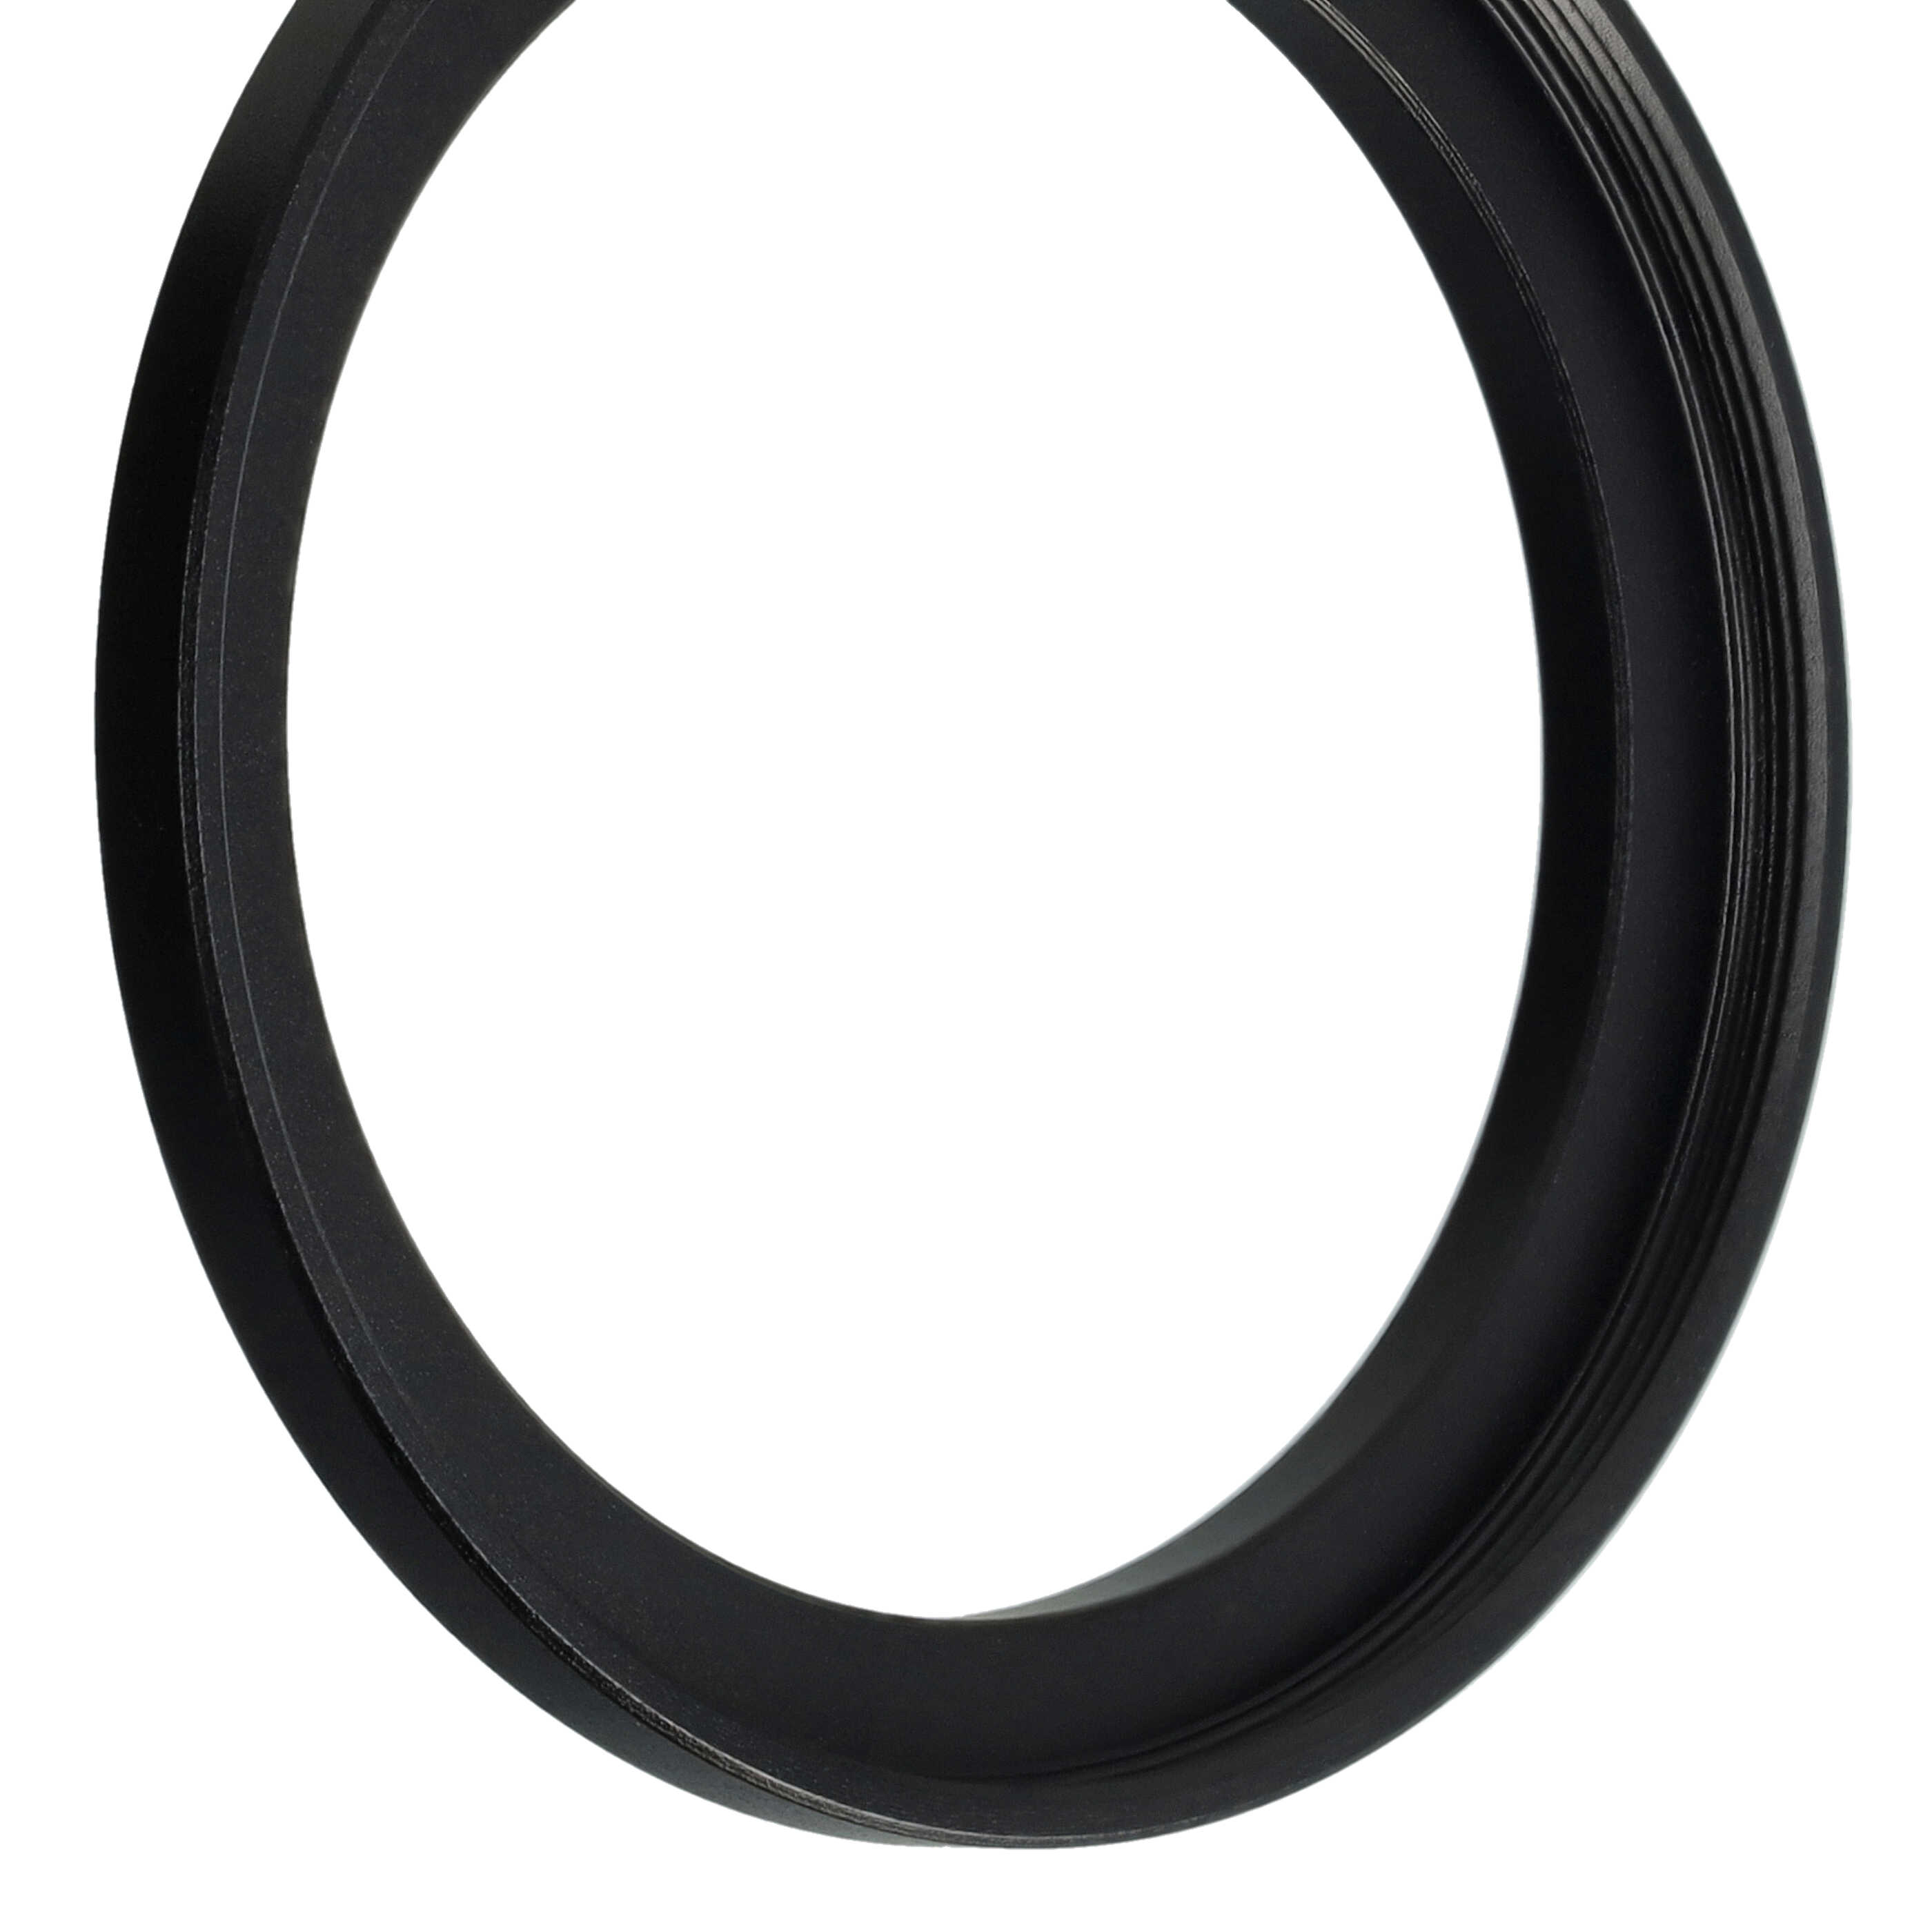 Step-Up Ring Adapter of 46 mm to 52 mmfor various Camera Lens - Filter Adapter